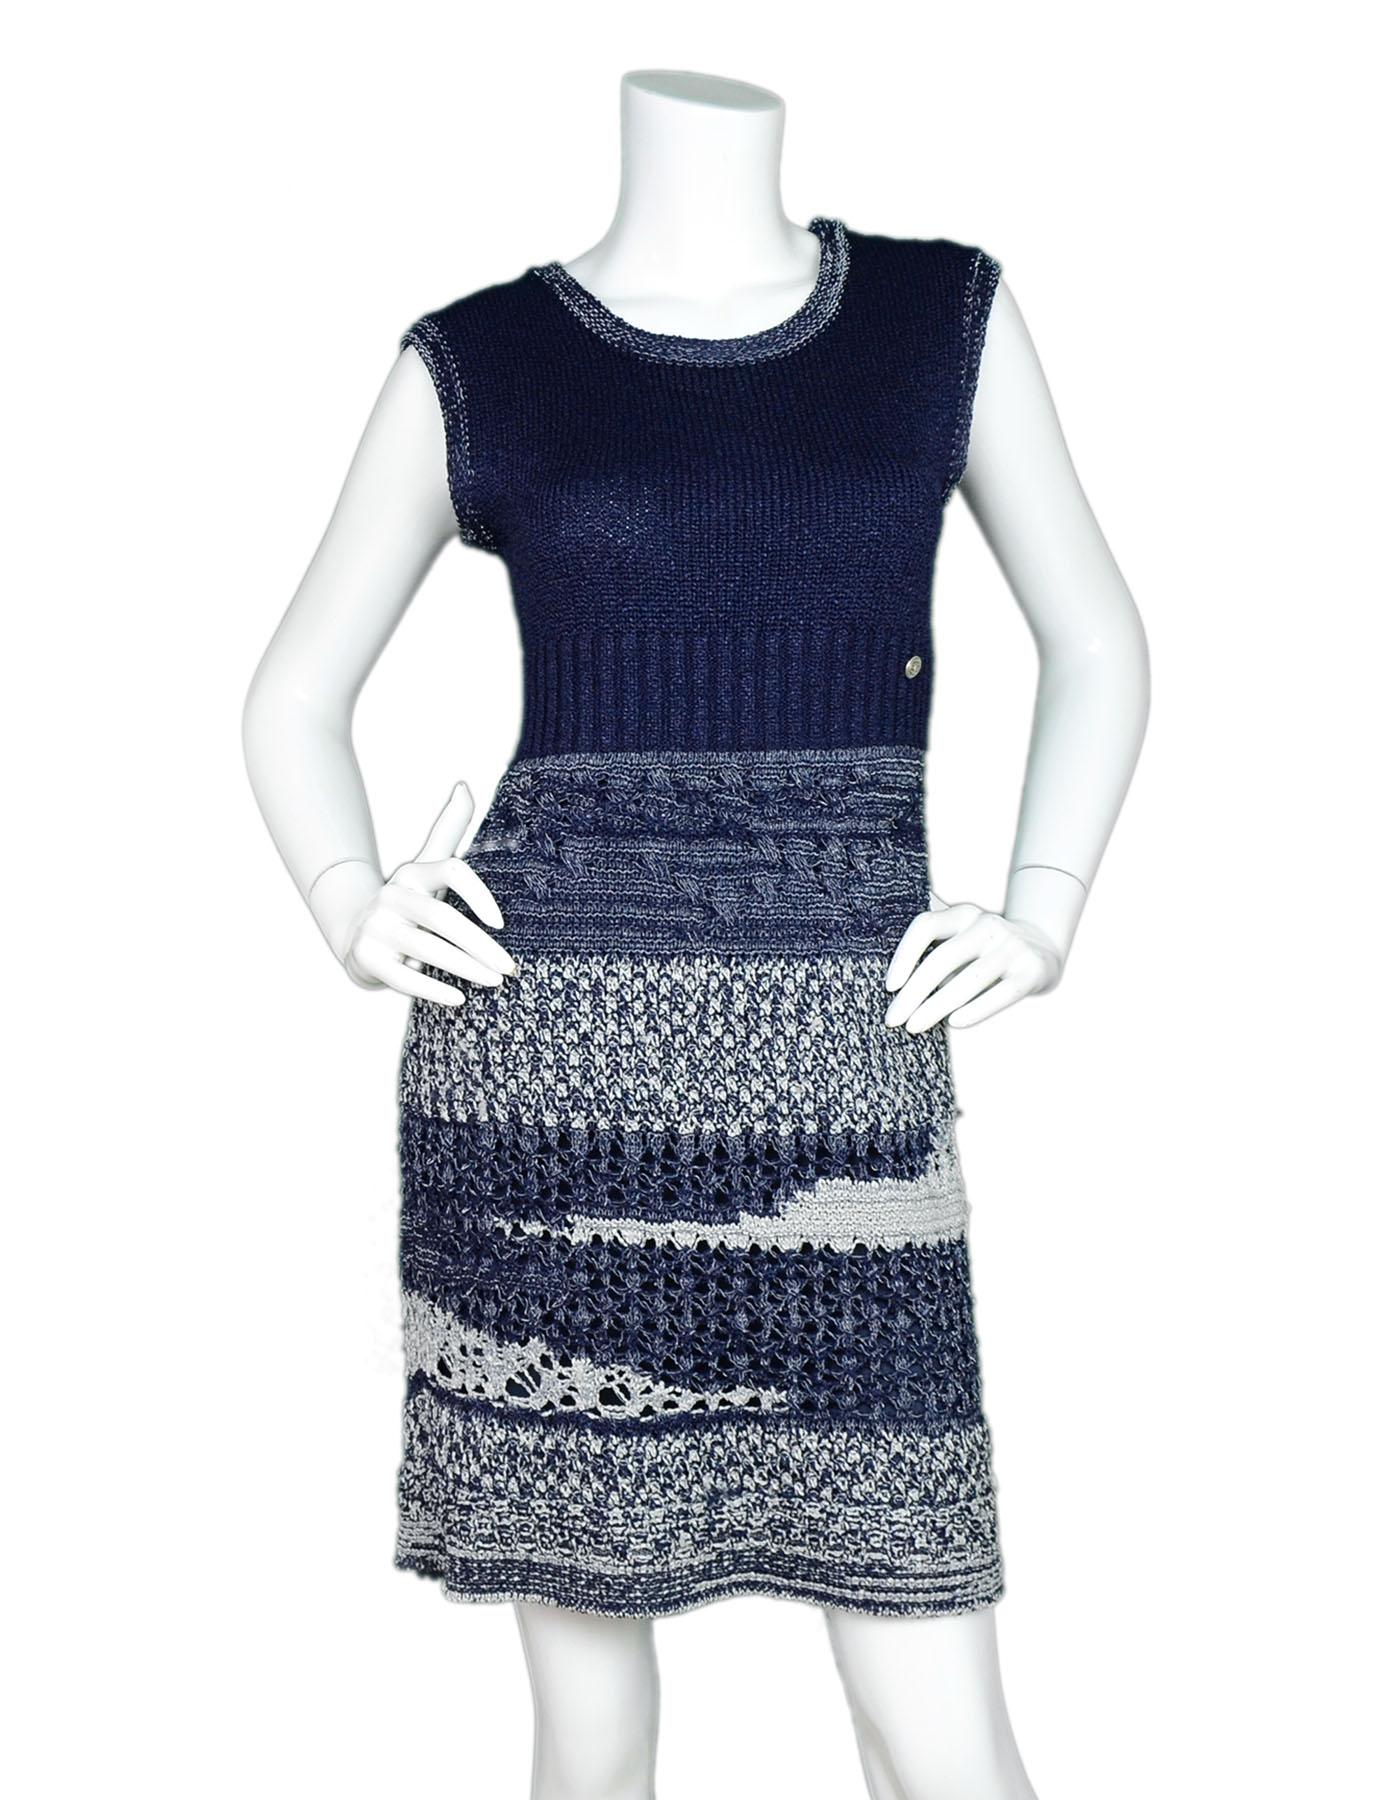 Chanel Navy & White Knit Dress Sz FR34

Features navy underslip

Made In: Italy
Color: Navy, white
Composition: 55% rayon, 18% nylon, 16% cotton, 6% tencel, 3% acrylic, 2% polyester
Lining: None
Closure/Opening: Pull-over
Exterior Pockets: